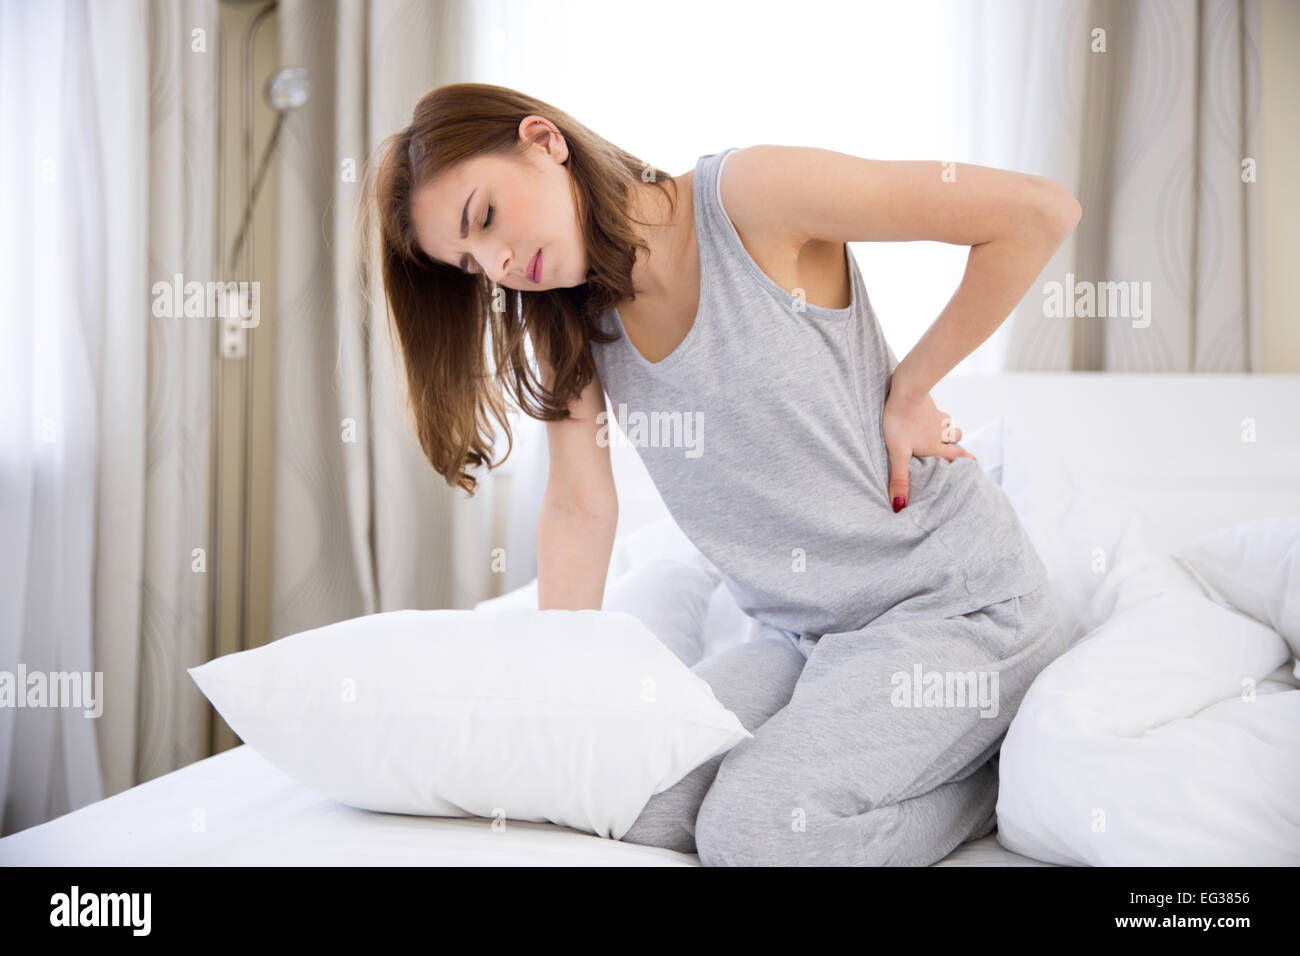 Young woman sitting on the bed with back pain Stock Photo